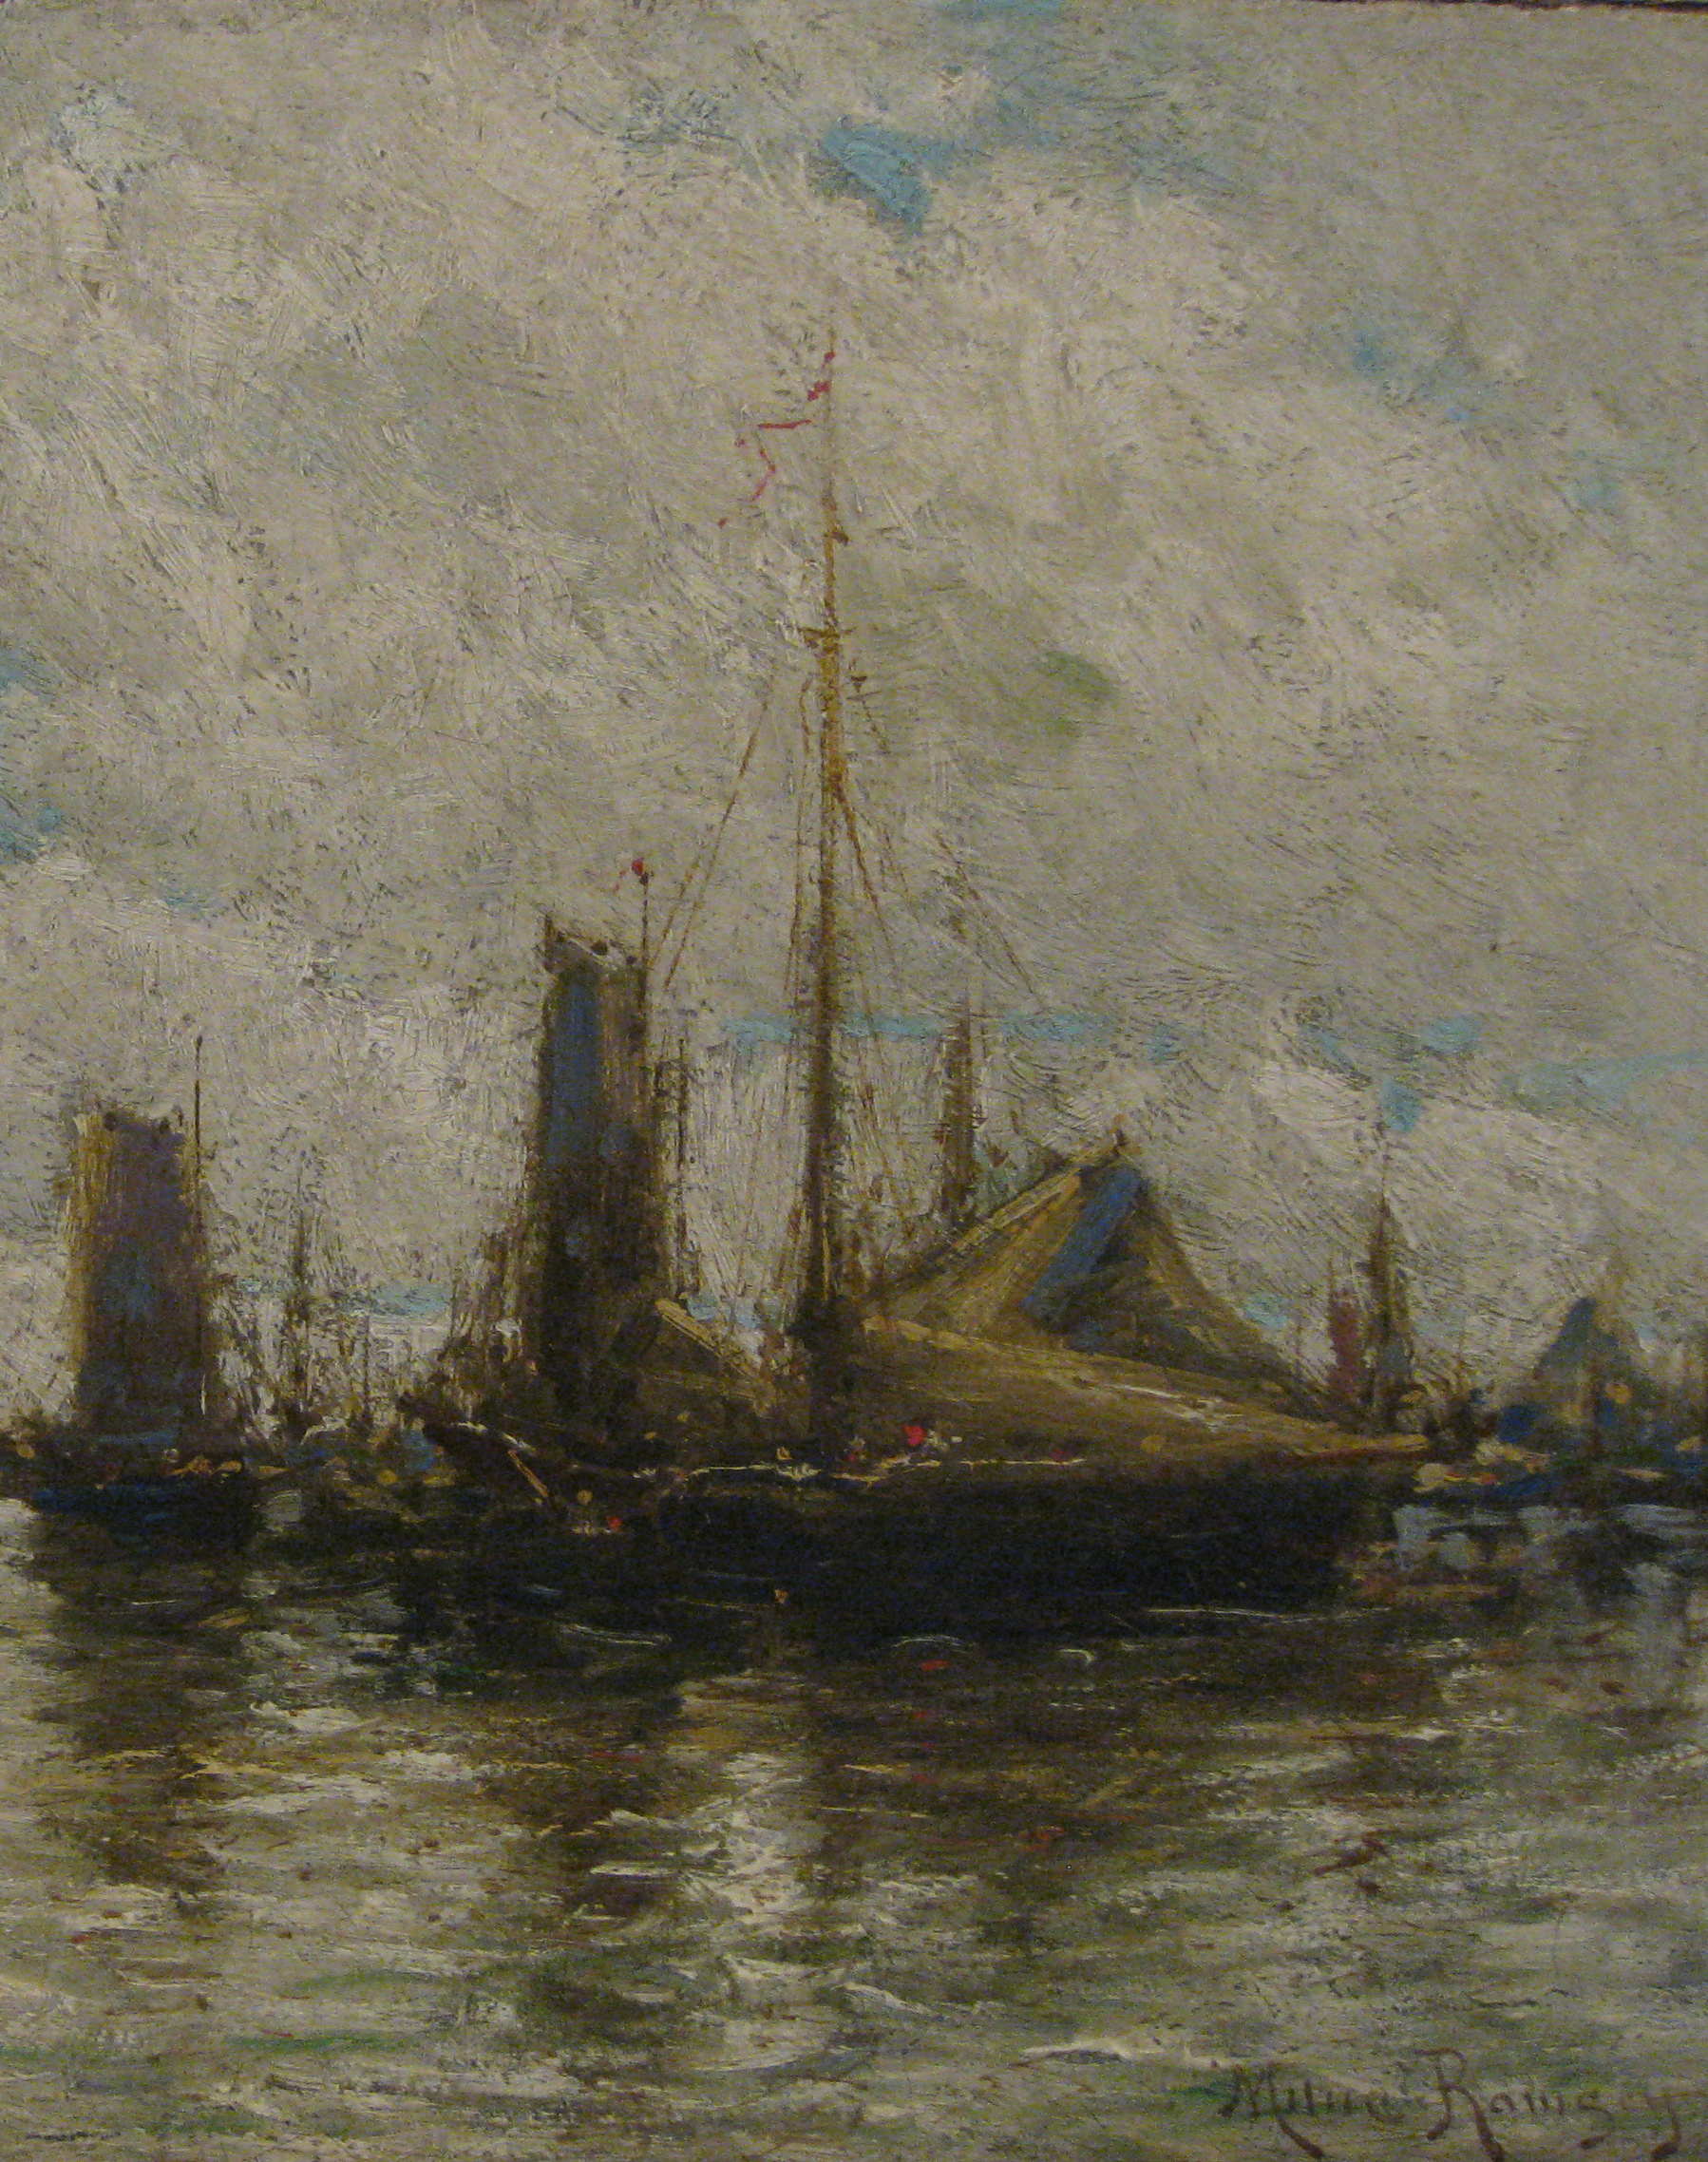 MILNE RAMSEY (1846-1915) Ships at Harbor (detail), oil on canvas, 12 x 18 inches, signed at lower right